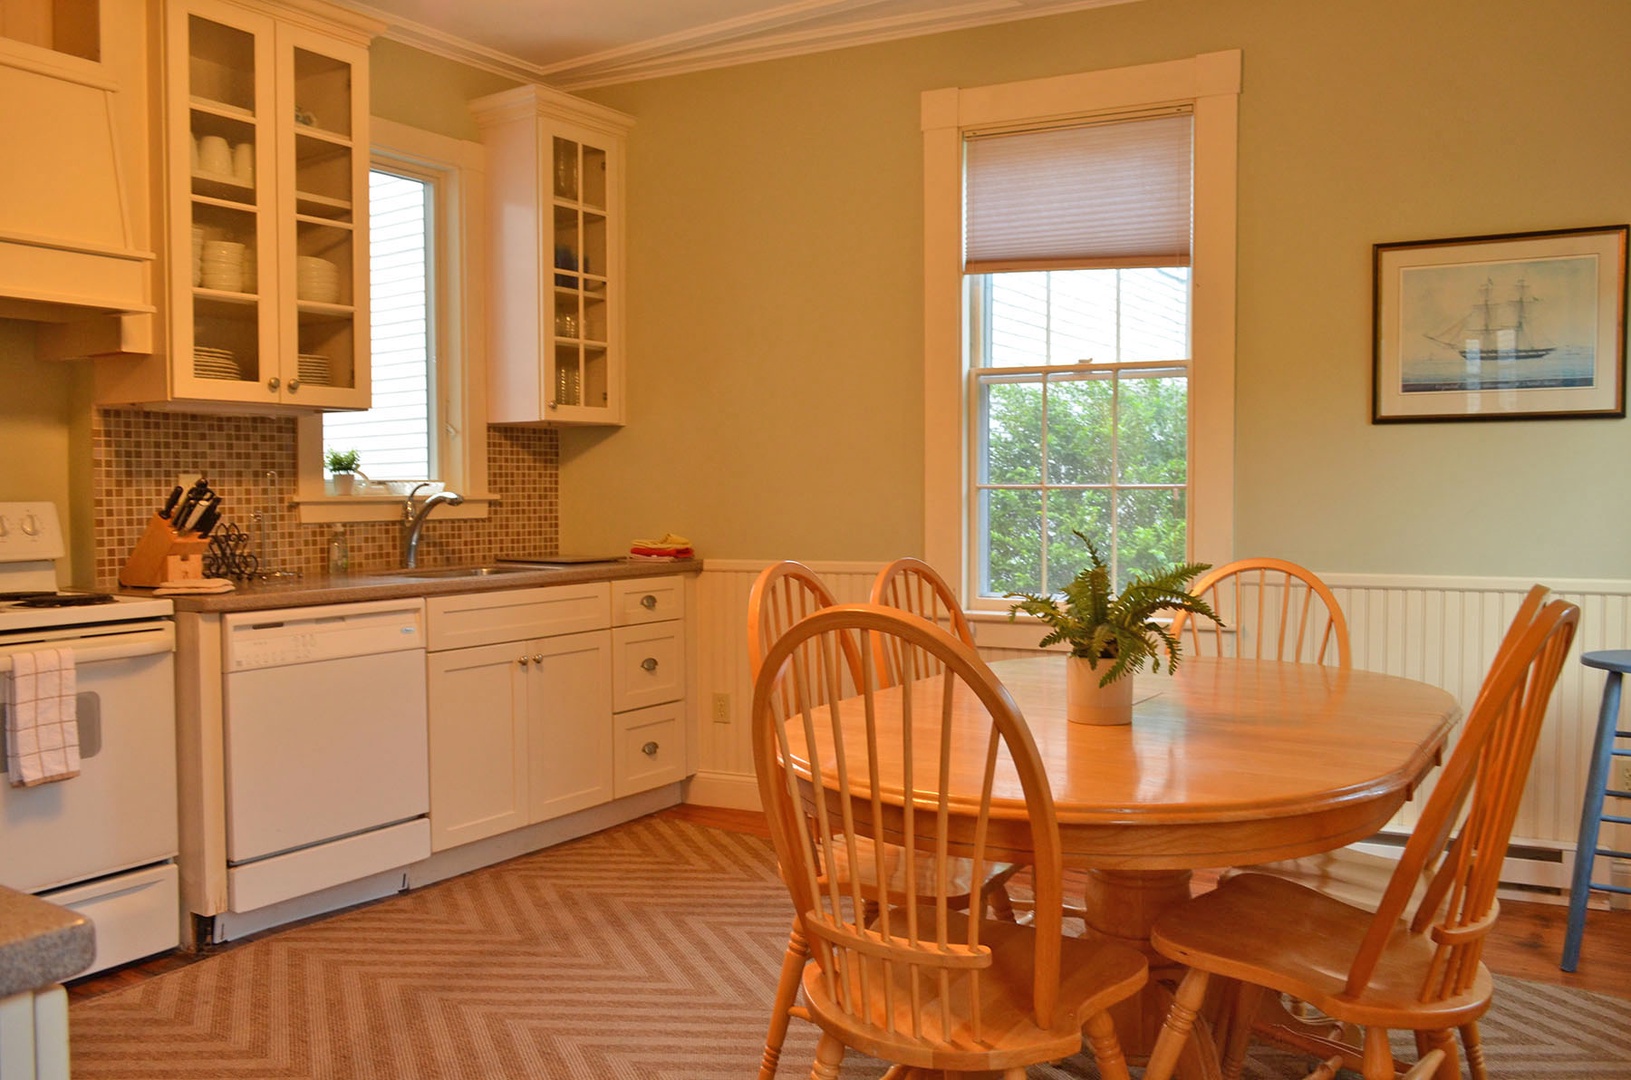 The eat-in kitchen with dining table.